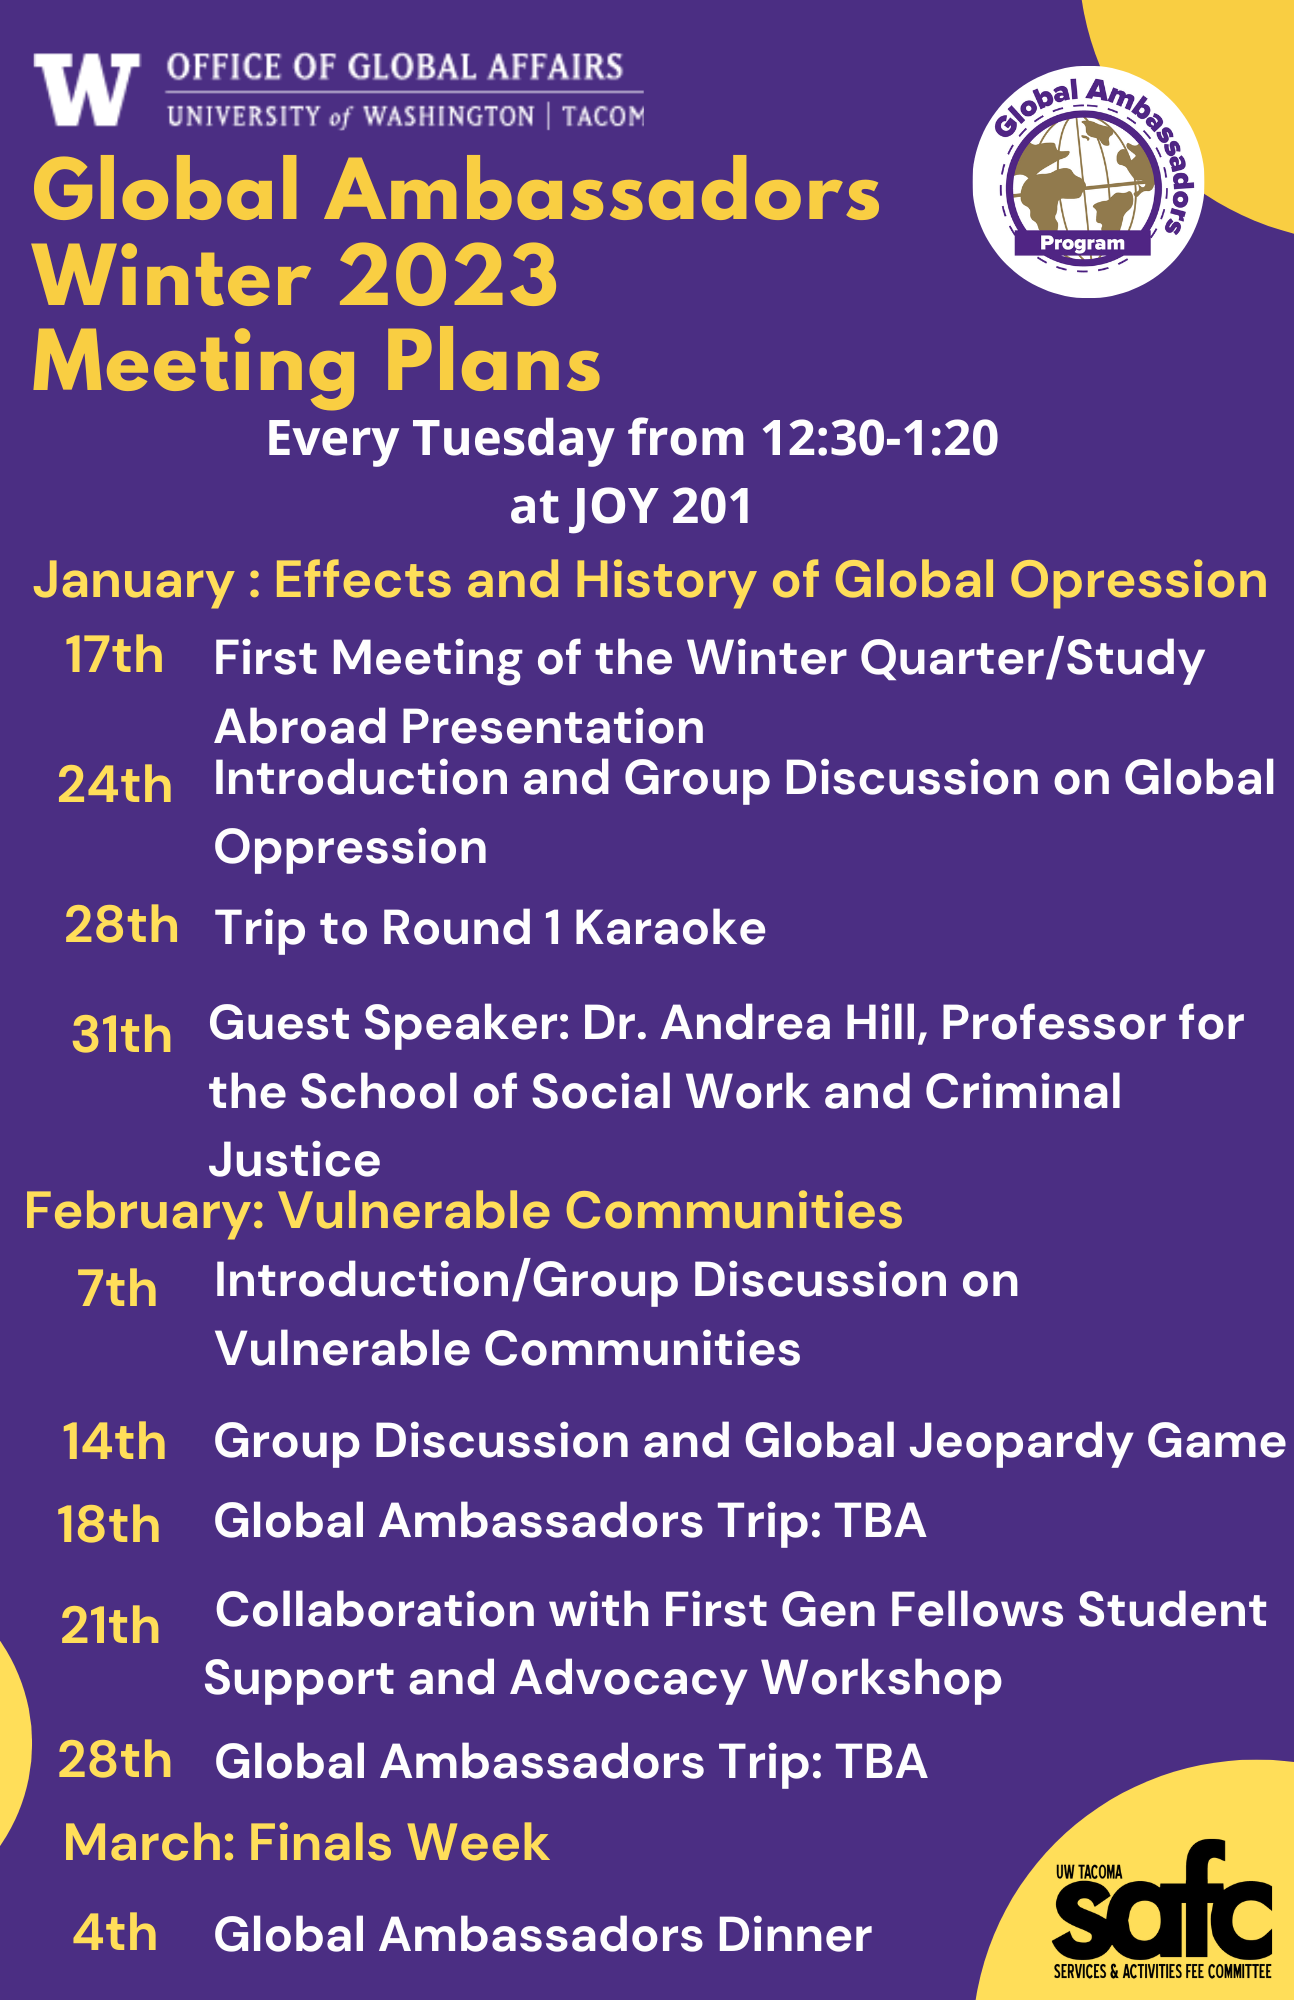 ​January : Effects and History of Global Opression Global Ambassadors Winter 2023 Meeting Plans 17th 24th 31th February: Vulnerable Communities 7th 14th 21th Every Tuesday from 12:30-1:20 at JOY 201 First Meeting of the Winter Quarter/Study Abroad Presentation Introduction and Group Discussion on Global Oppression Guest Speaker: Dr. Andrea Hill, Professor for the School of Social Work and Criminal Justice Introduction/Group Discussion on Vulnerable Communities Group Discussion and Global Jeopardy Game 28th 